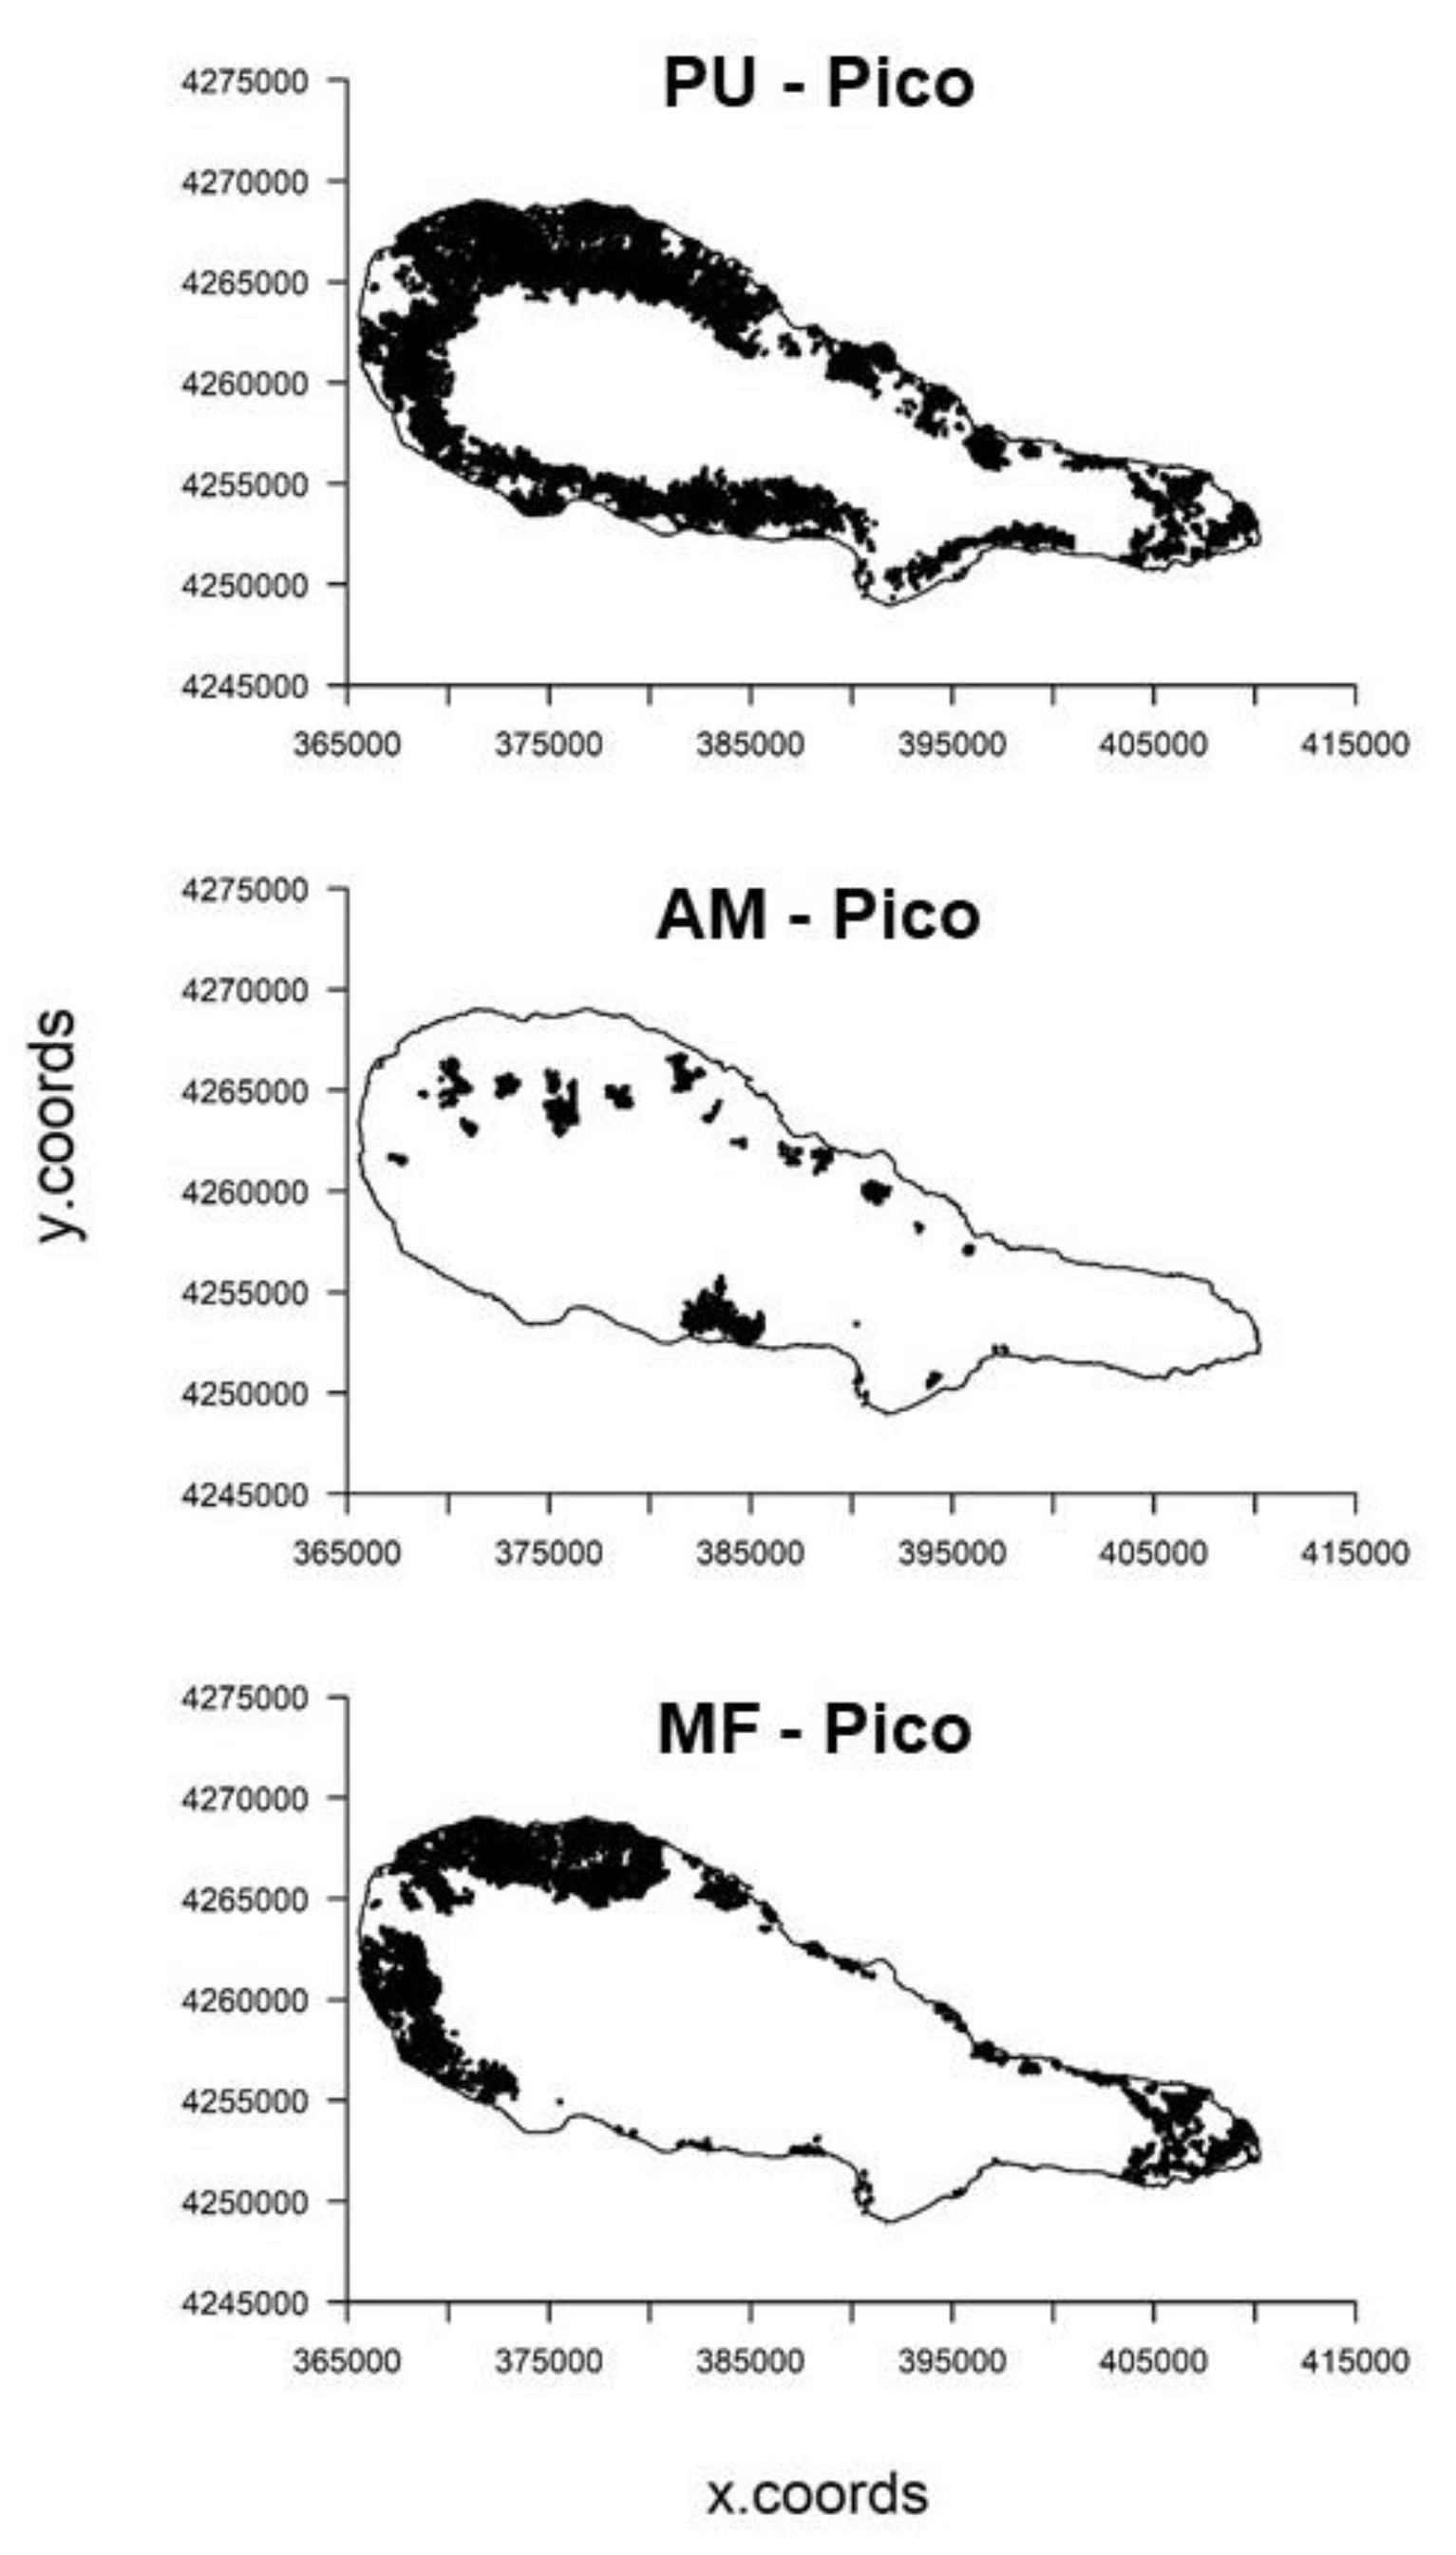 Forests | Free Full-Text | Limitations of Species Distribution Models Based  on Available Climate Change Data: A Case Study in the Azorean Forest